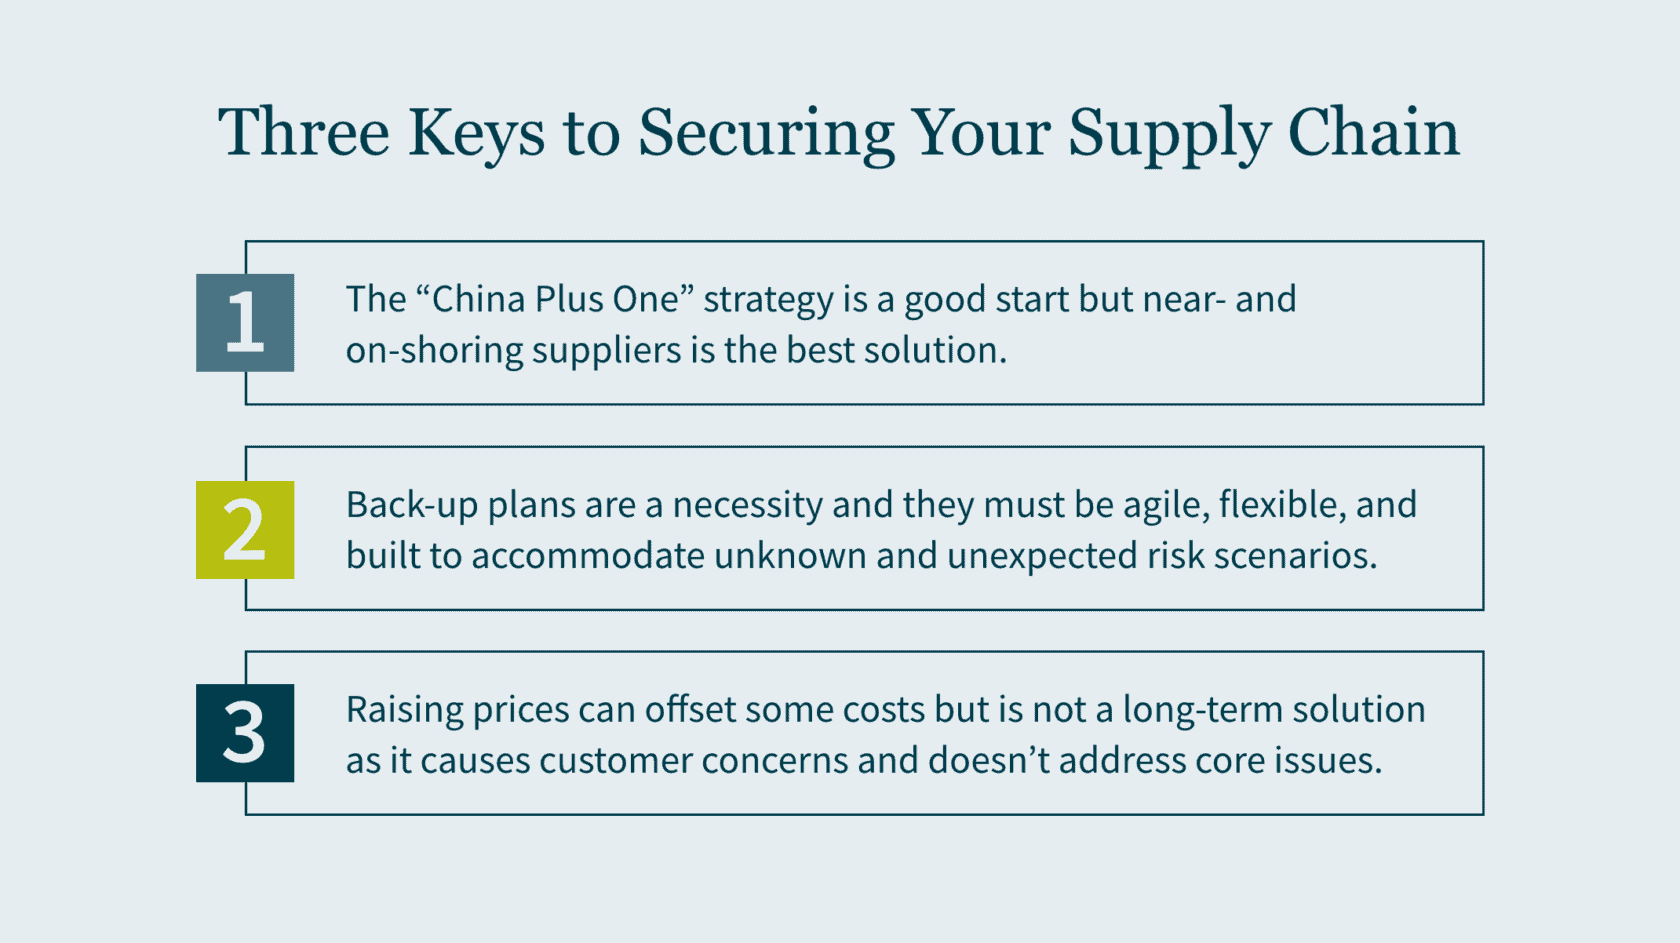 Three Keys to Securing Your Supply Chain